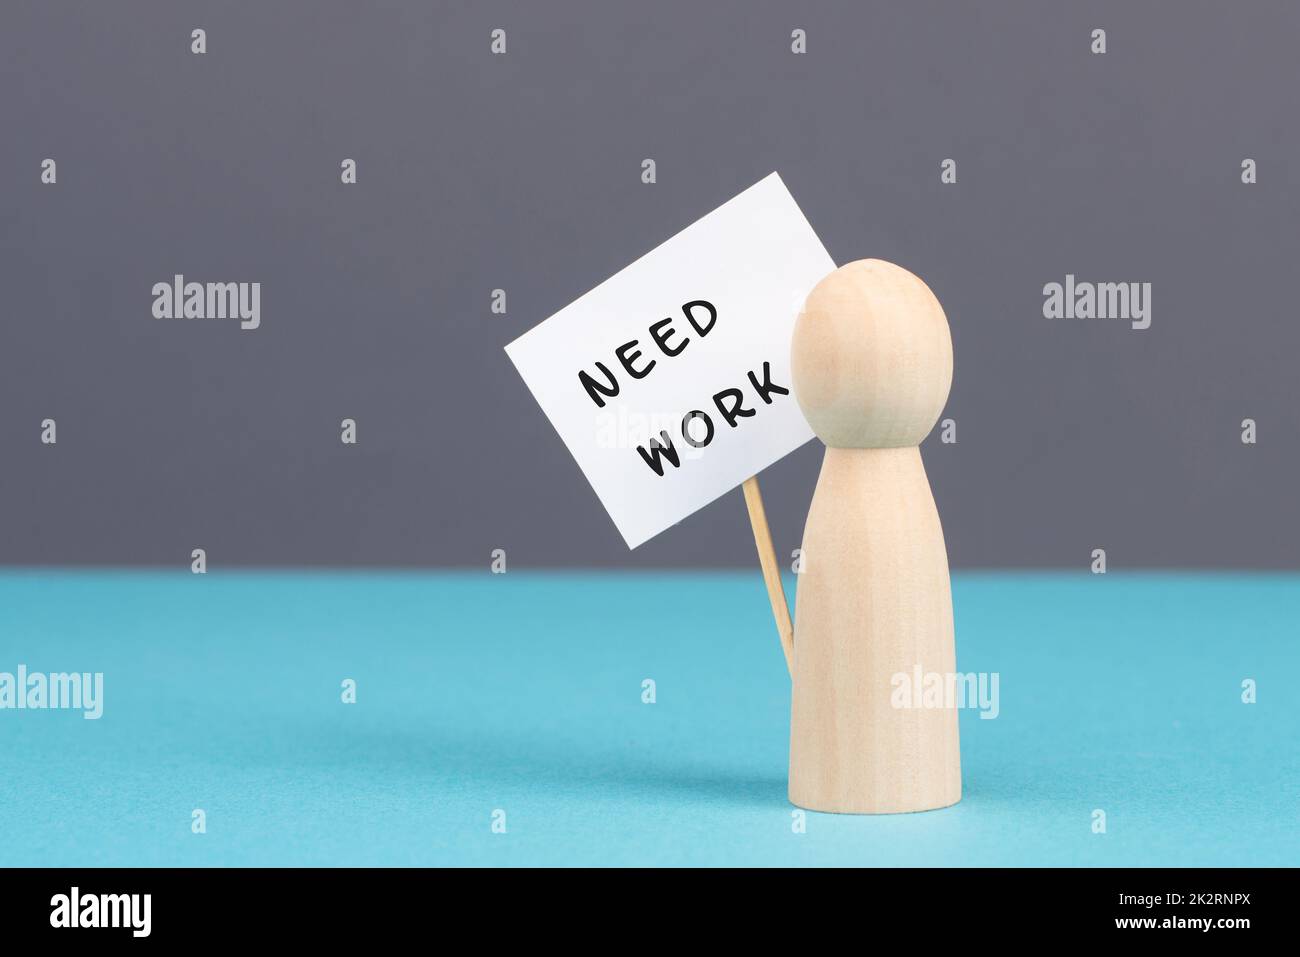 Man with a sign need work, unemployed is looking for a job, financial crisis, jobless people, social issue Stock Photo